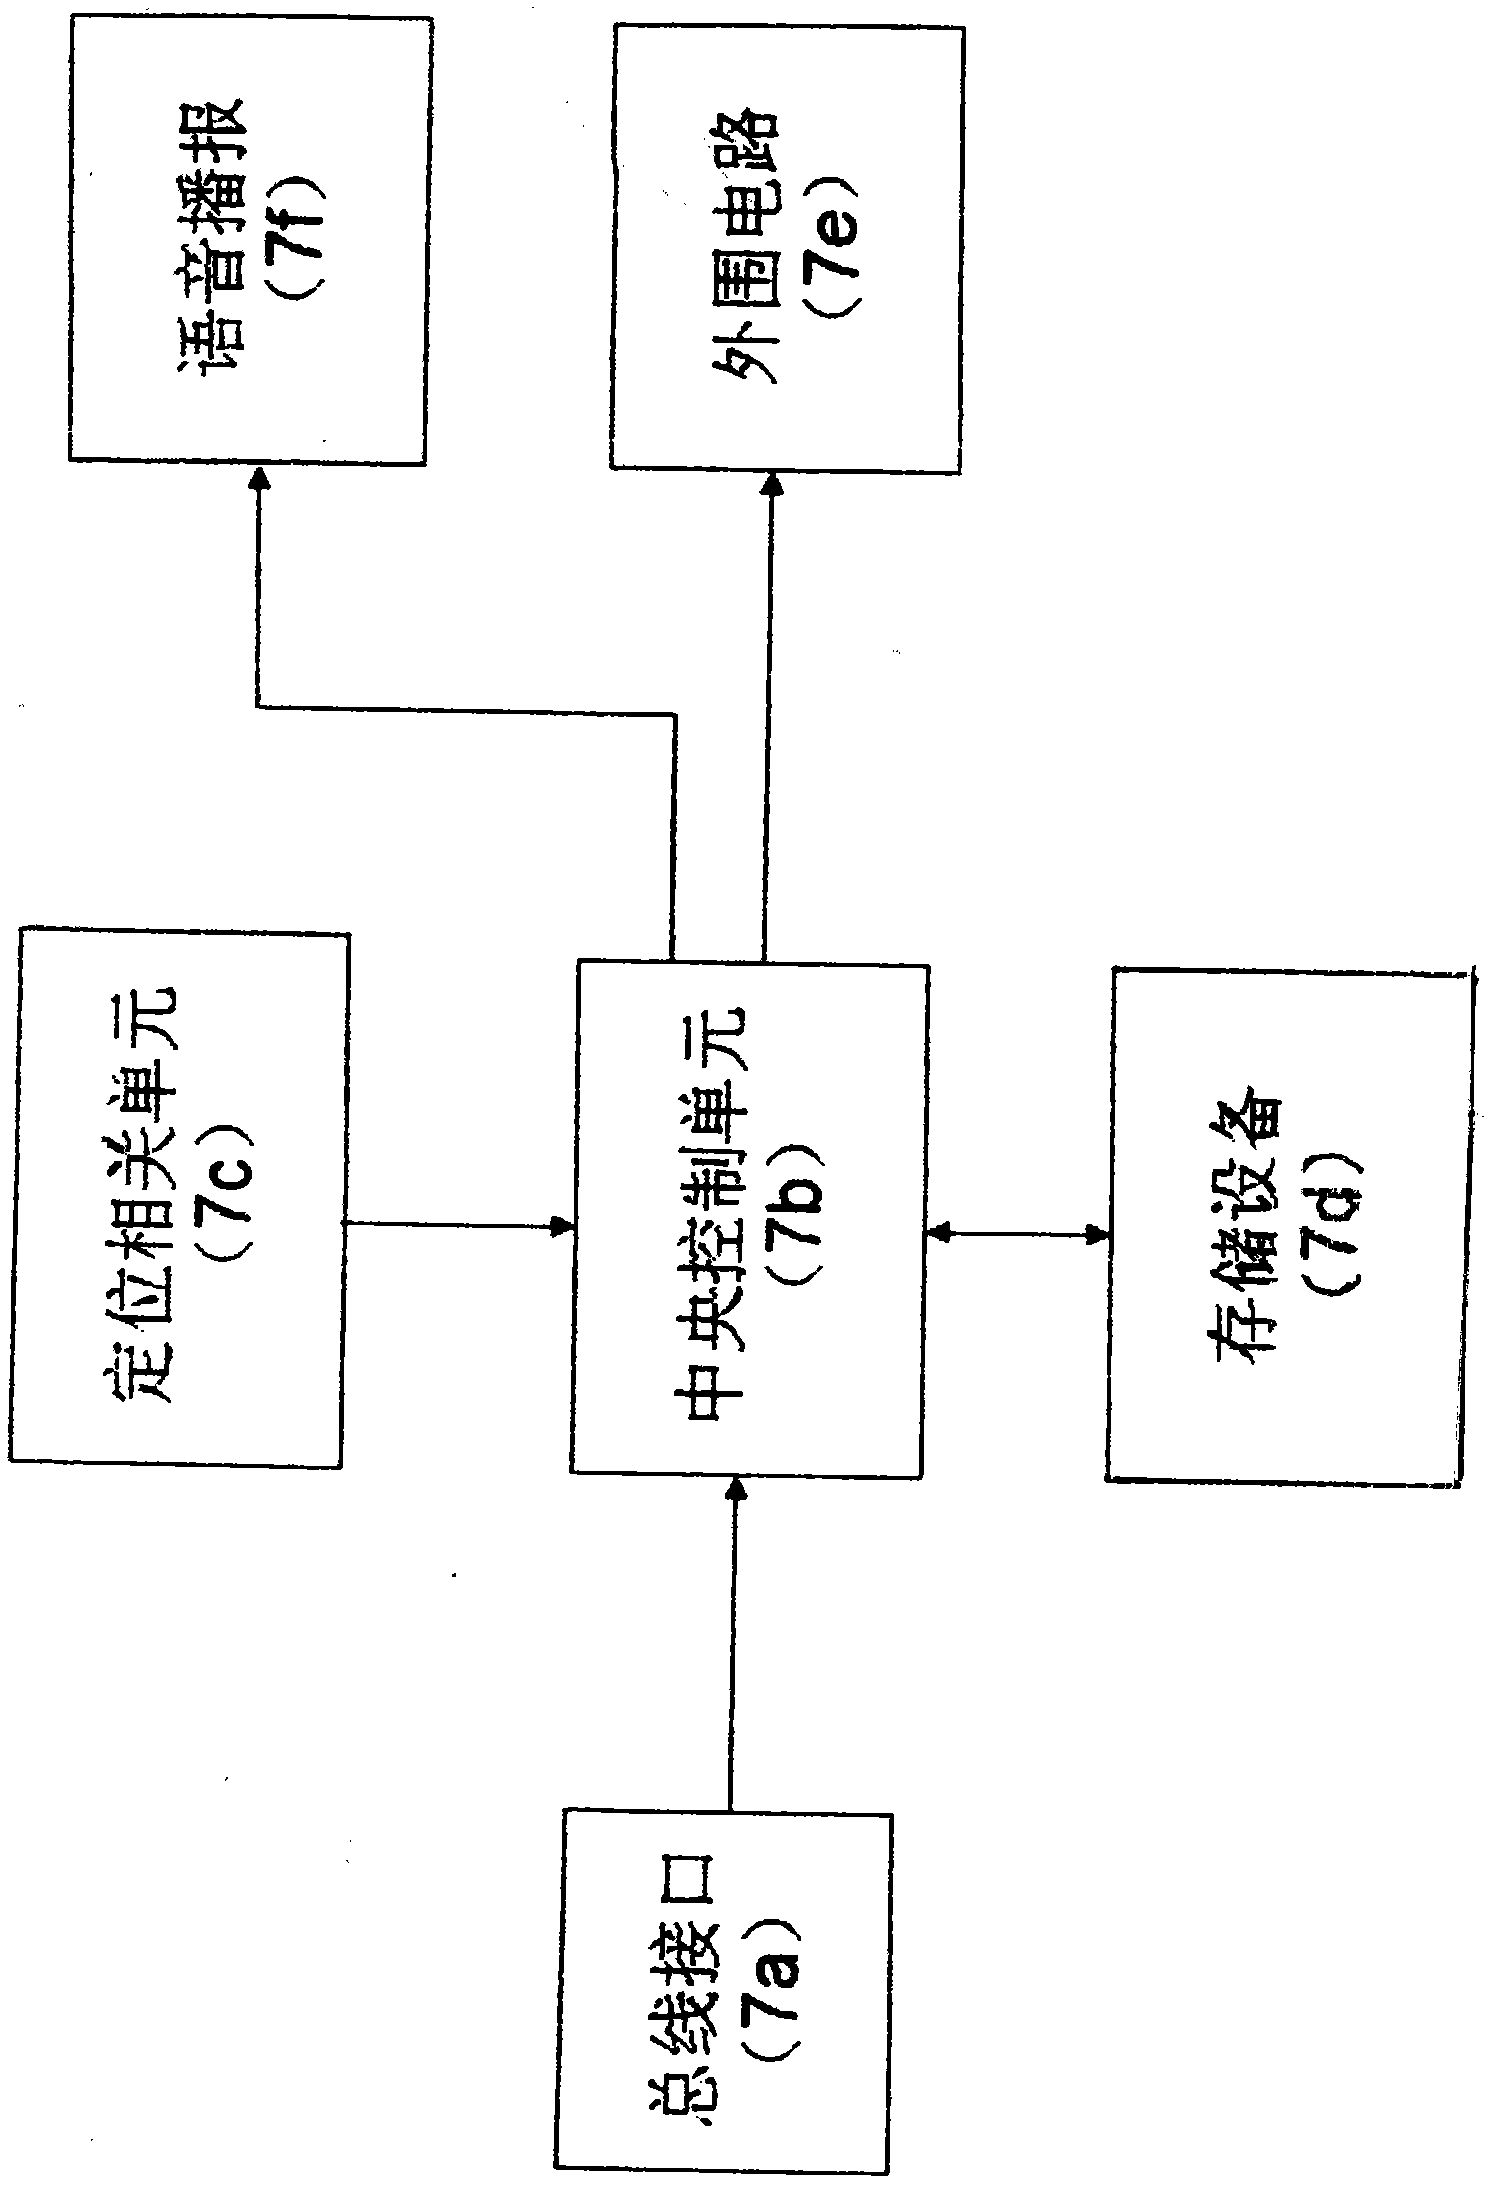 Medical emergency treatment method and system